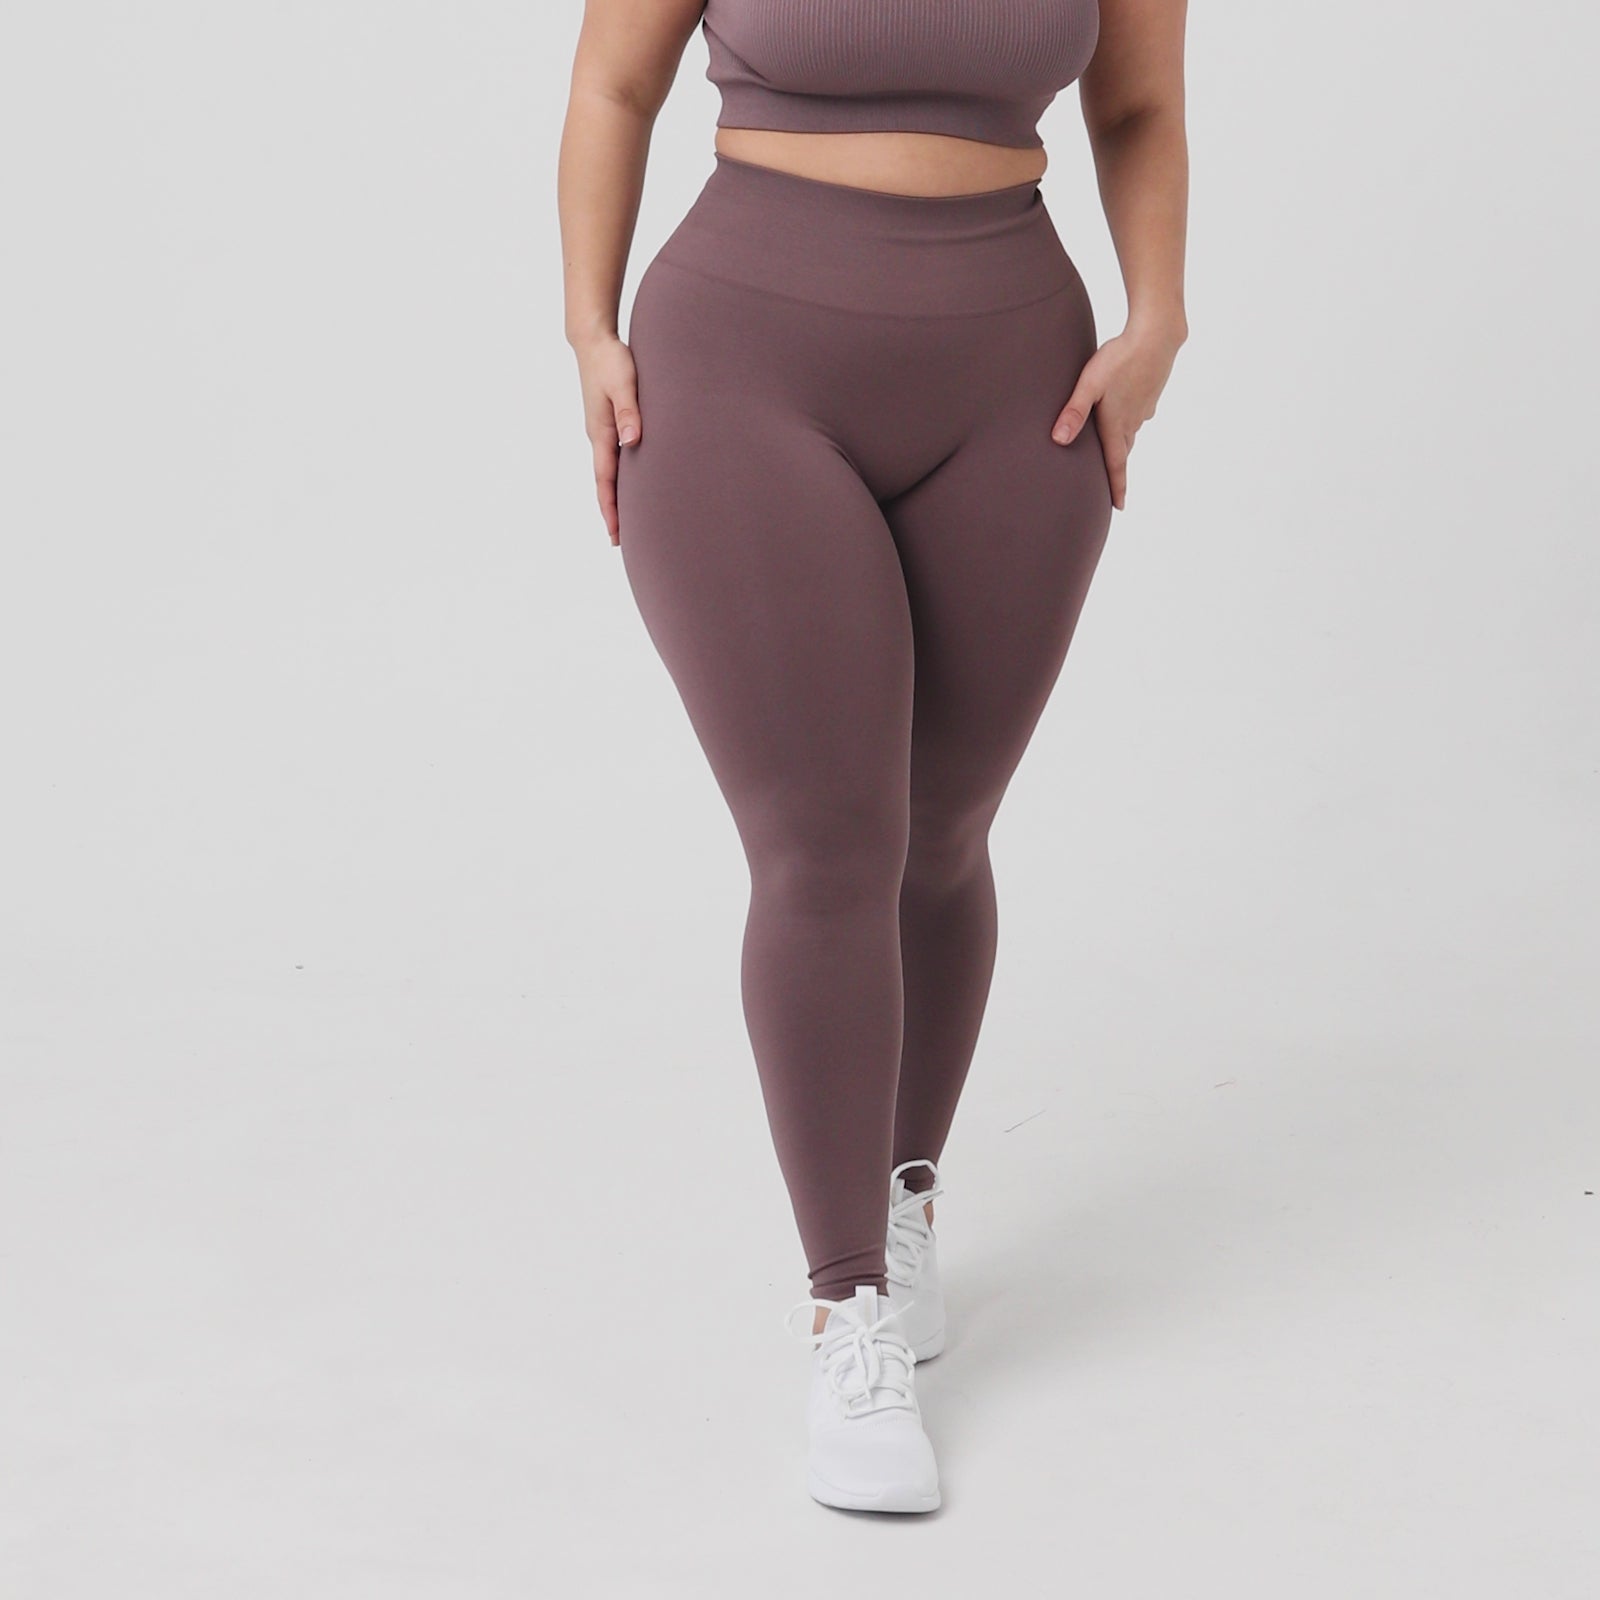  PAVOI ACTIVE HiPerform Collection, Women's Straight Strap Low  Support Butt Sculpting Full-Length Jumpsuit, One Piece Romper